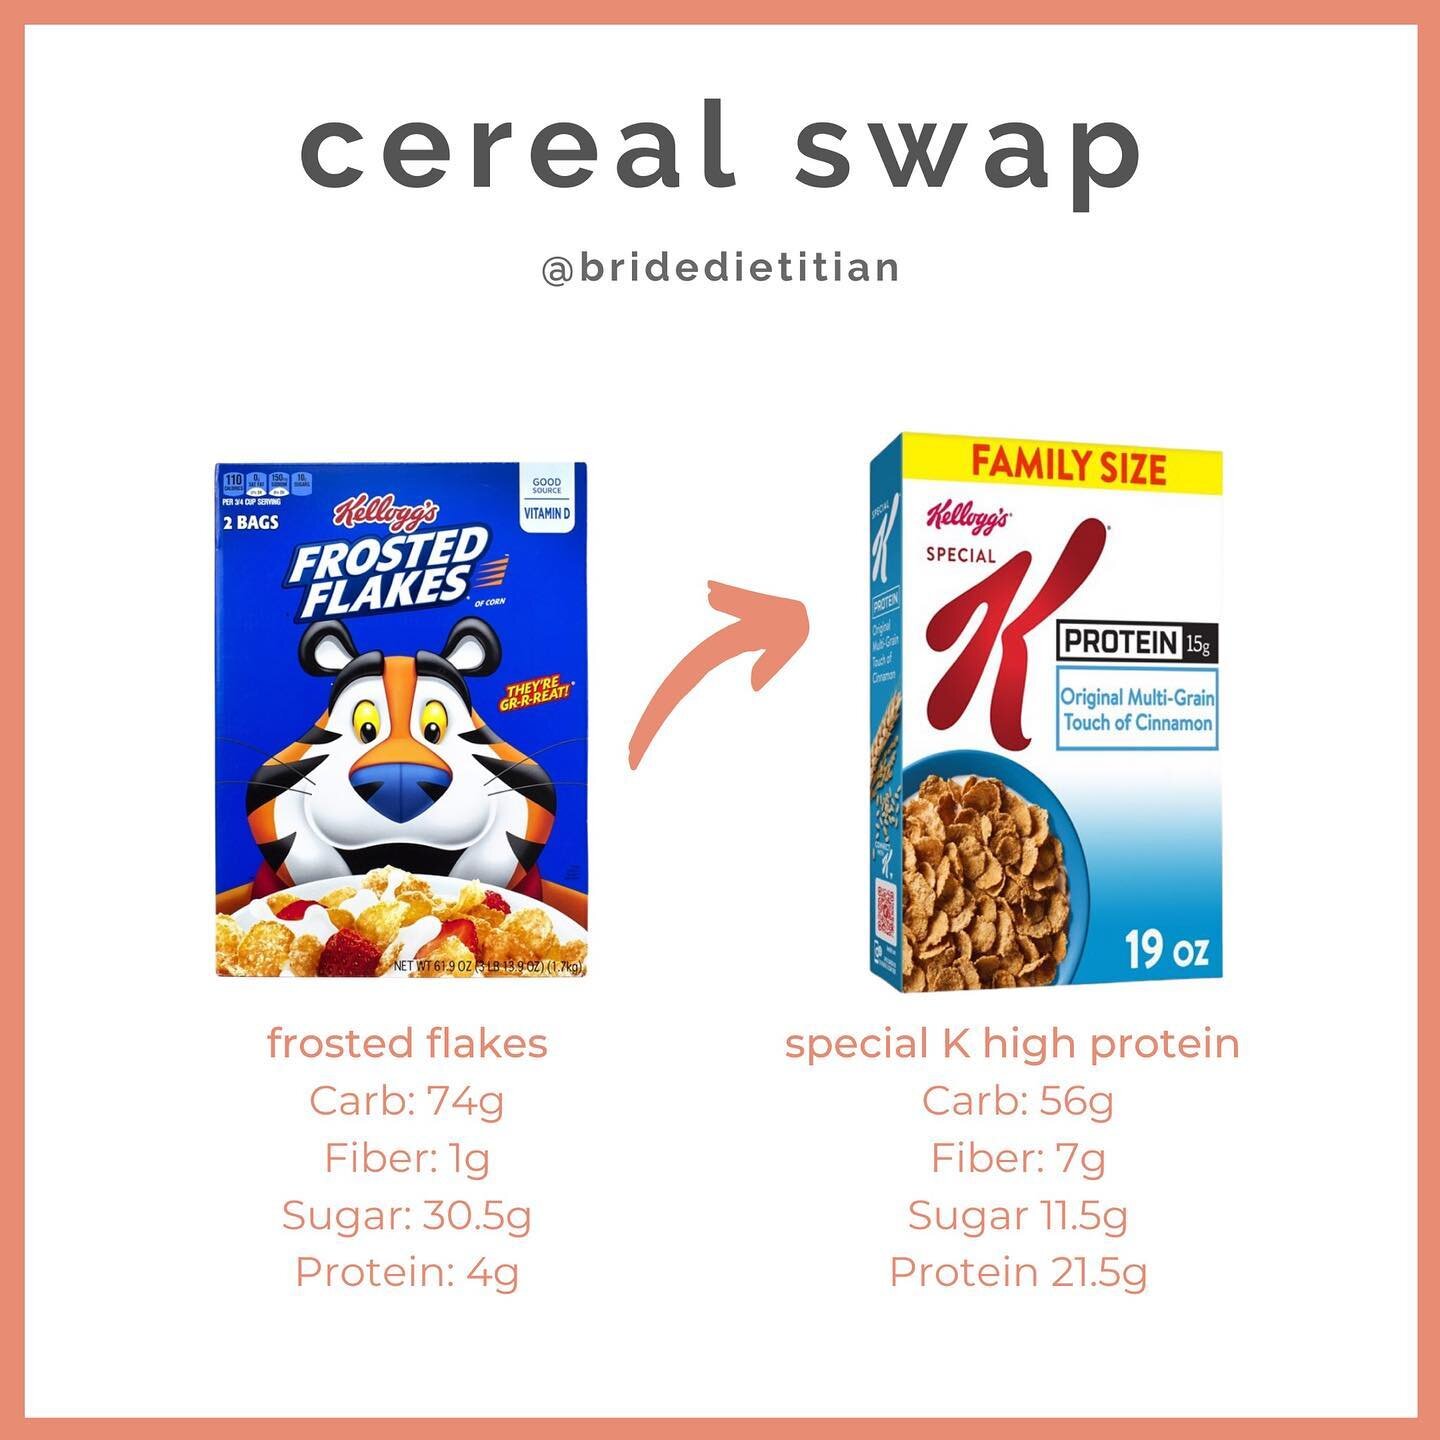 DOUBLE TAP IF YOU ARE A CEREAL LOVER 😍Unfortunately, cereal can be synonymous with sugar. If you&rsquo;re looking for an alternative to your cereal craving, here are a few healthier options to make that happen:

🥣 Fiber One (Net Carb: 34g  Fiber: 3